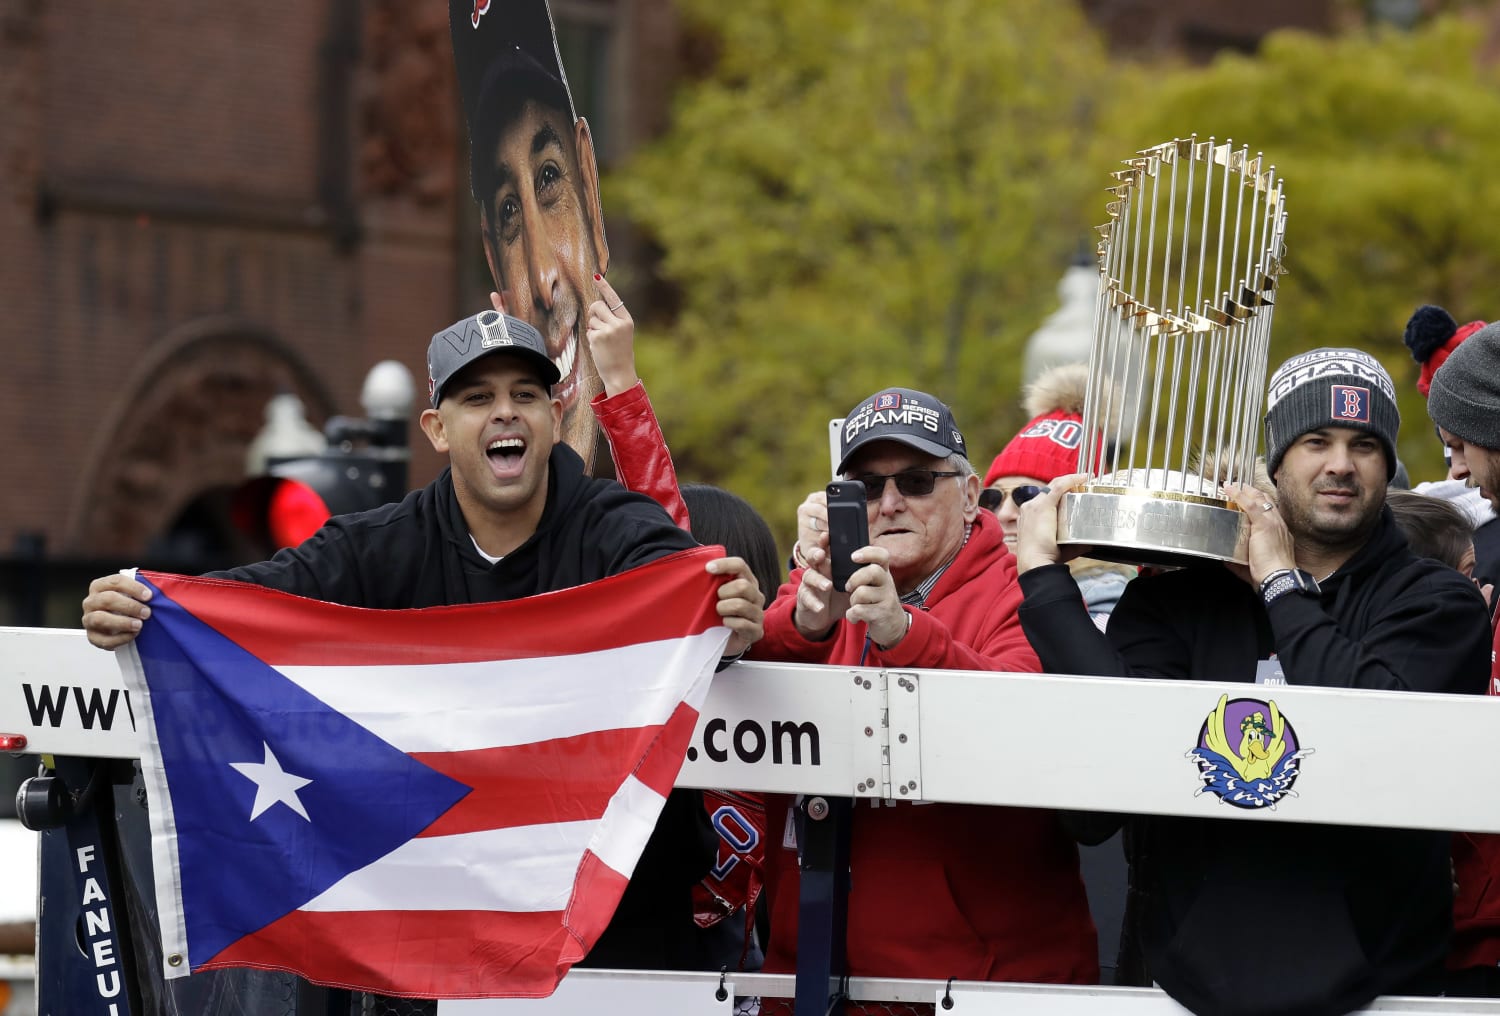 Alex Cora says he will be back with Red Sox in 2024. But in what